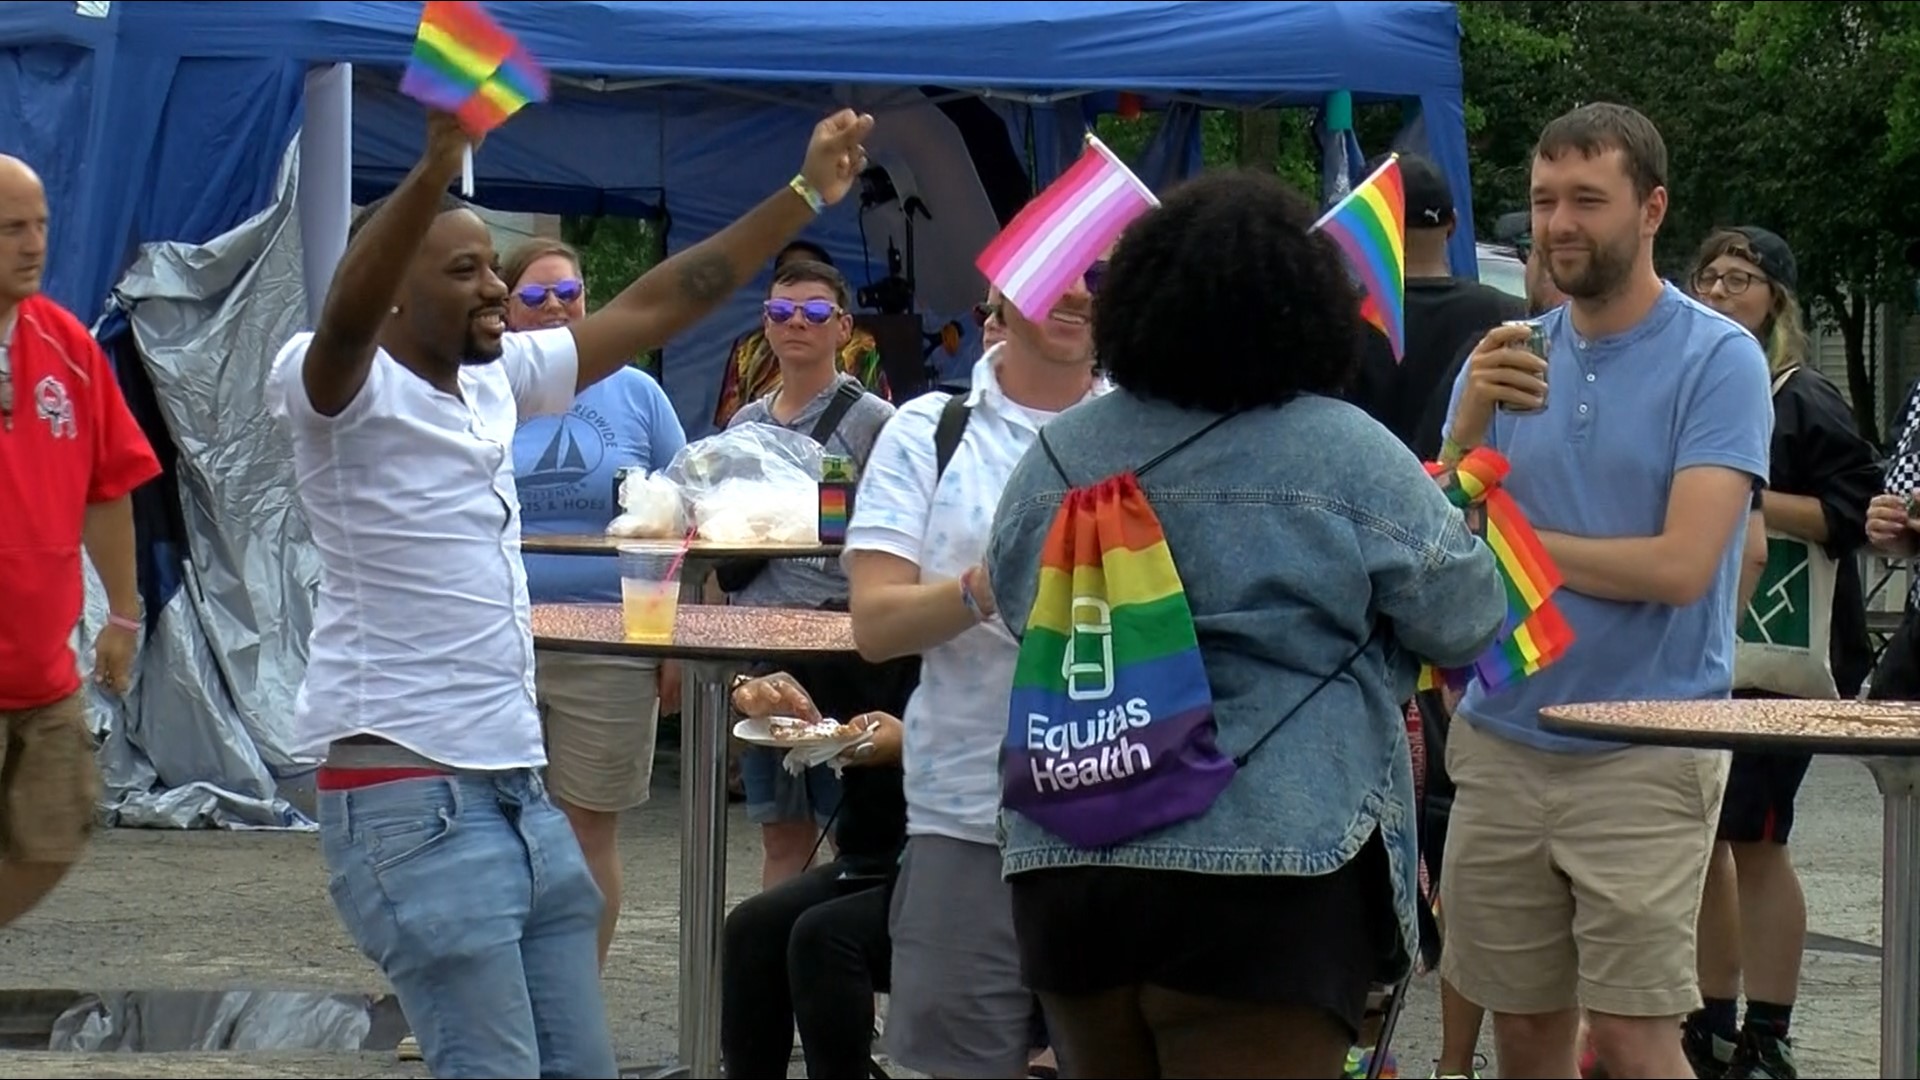 Toledo celebrates love at 6th annual Love Fest equality event